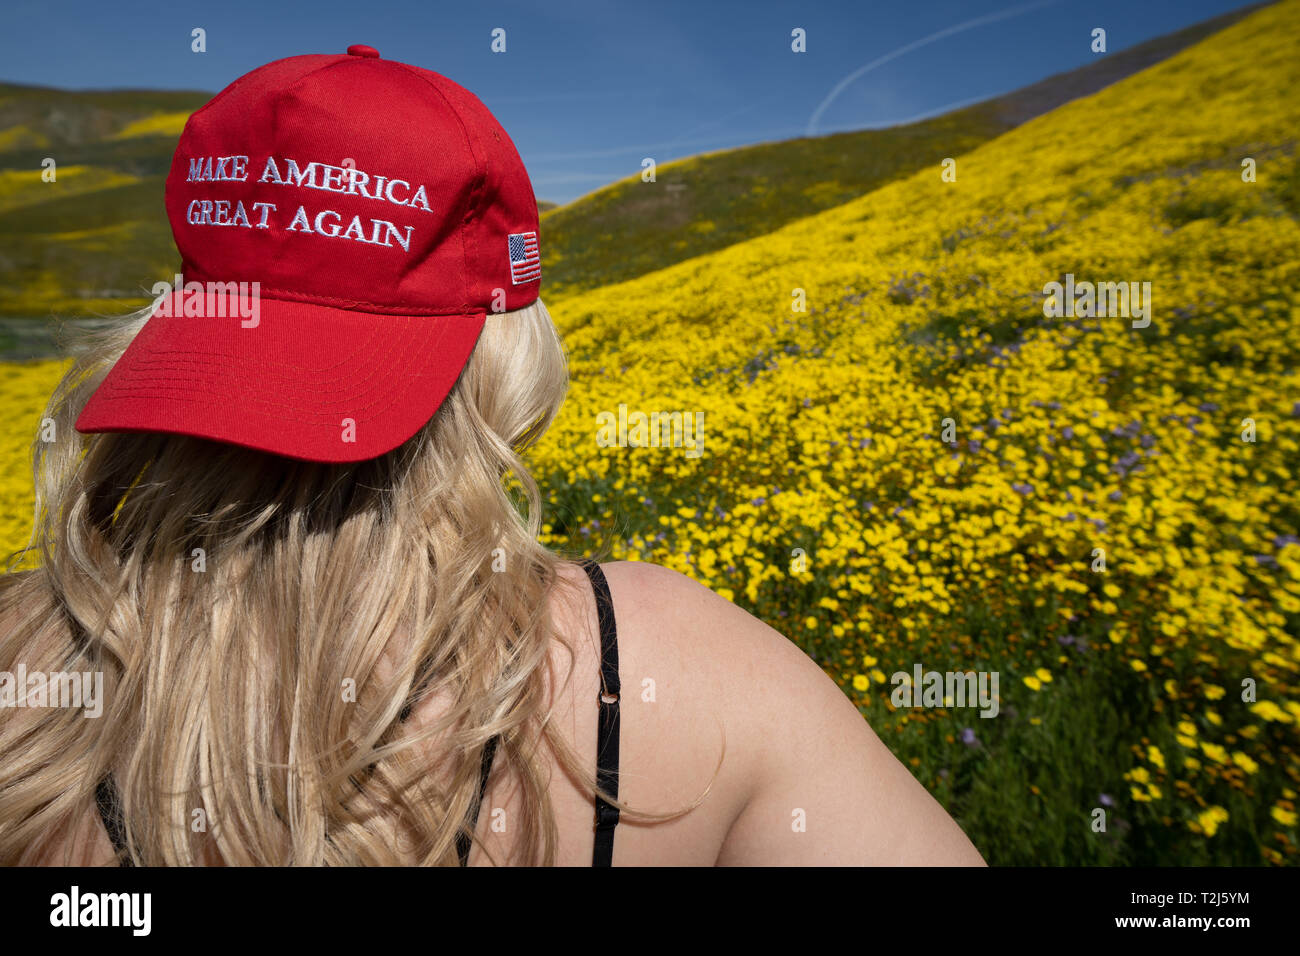 Taft, California - March 25, 2019: Blonde woman wearing a Donald Trump Make America Great Again hat, sitting in a field of yellow wildflowers. Concept Stock Photo